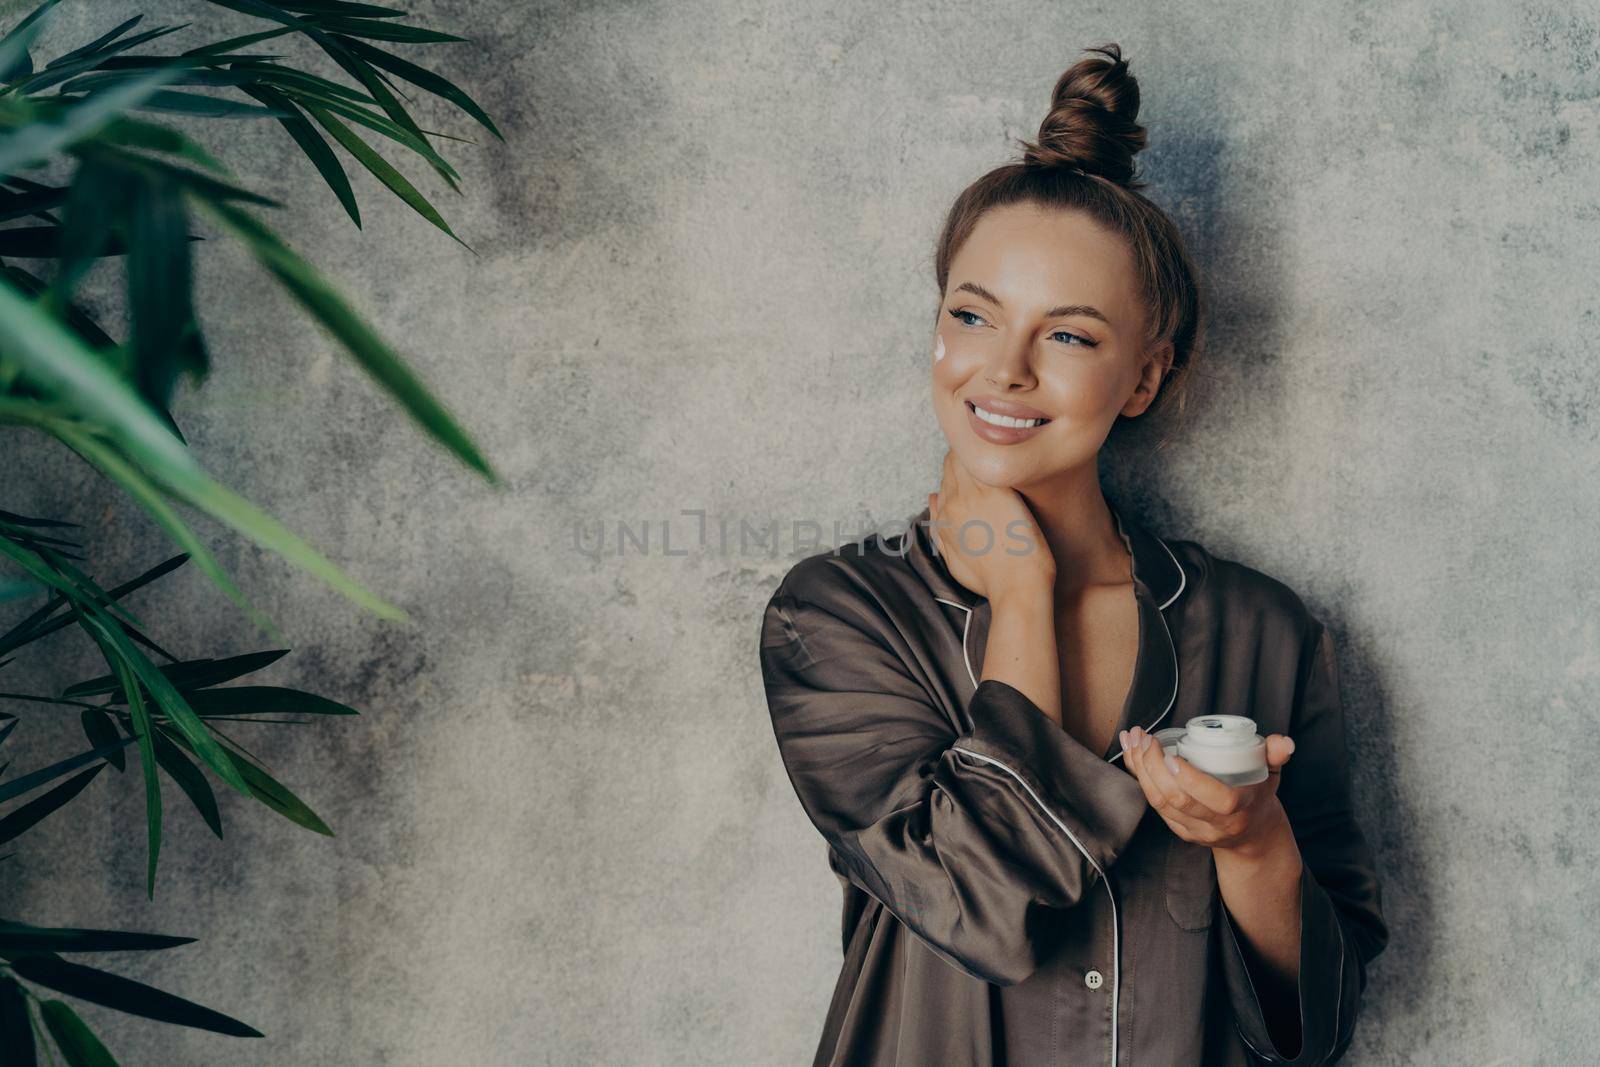 Young beautiful woman with glowing healthy skin broadly smiling while holding moisturizing face cream in her hand during morning cosmetic routine procedure at home, isolated over concrete wall